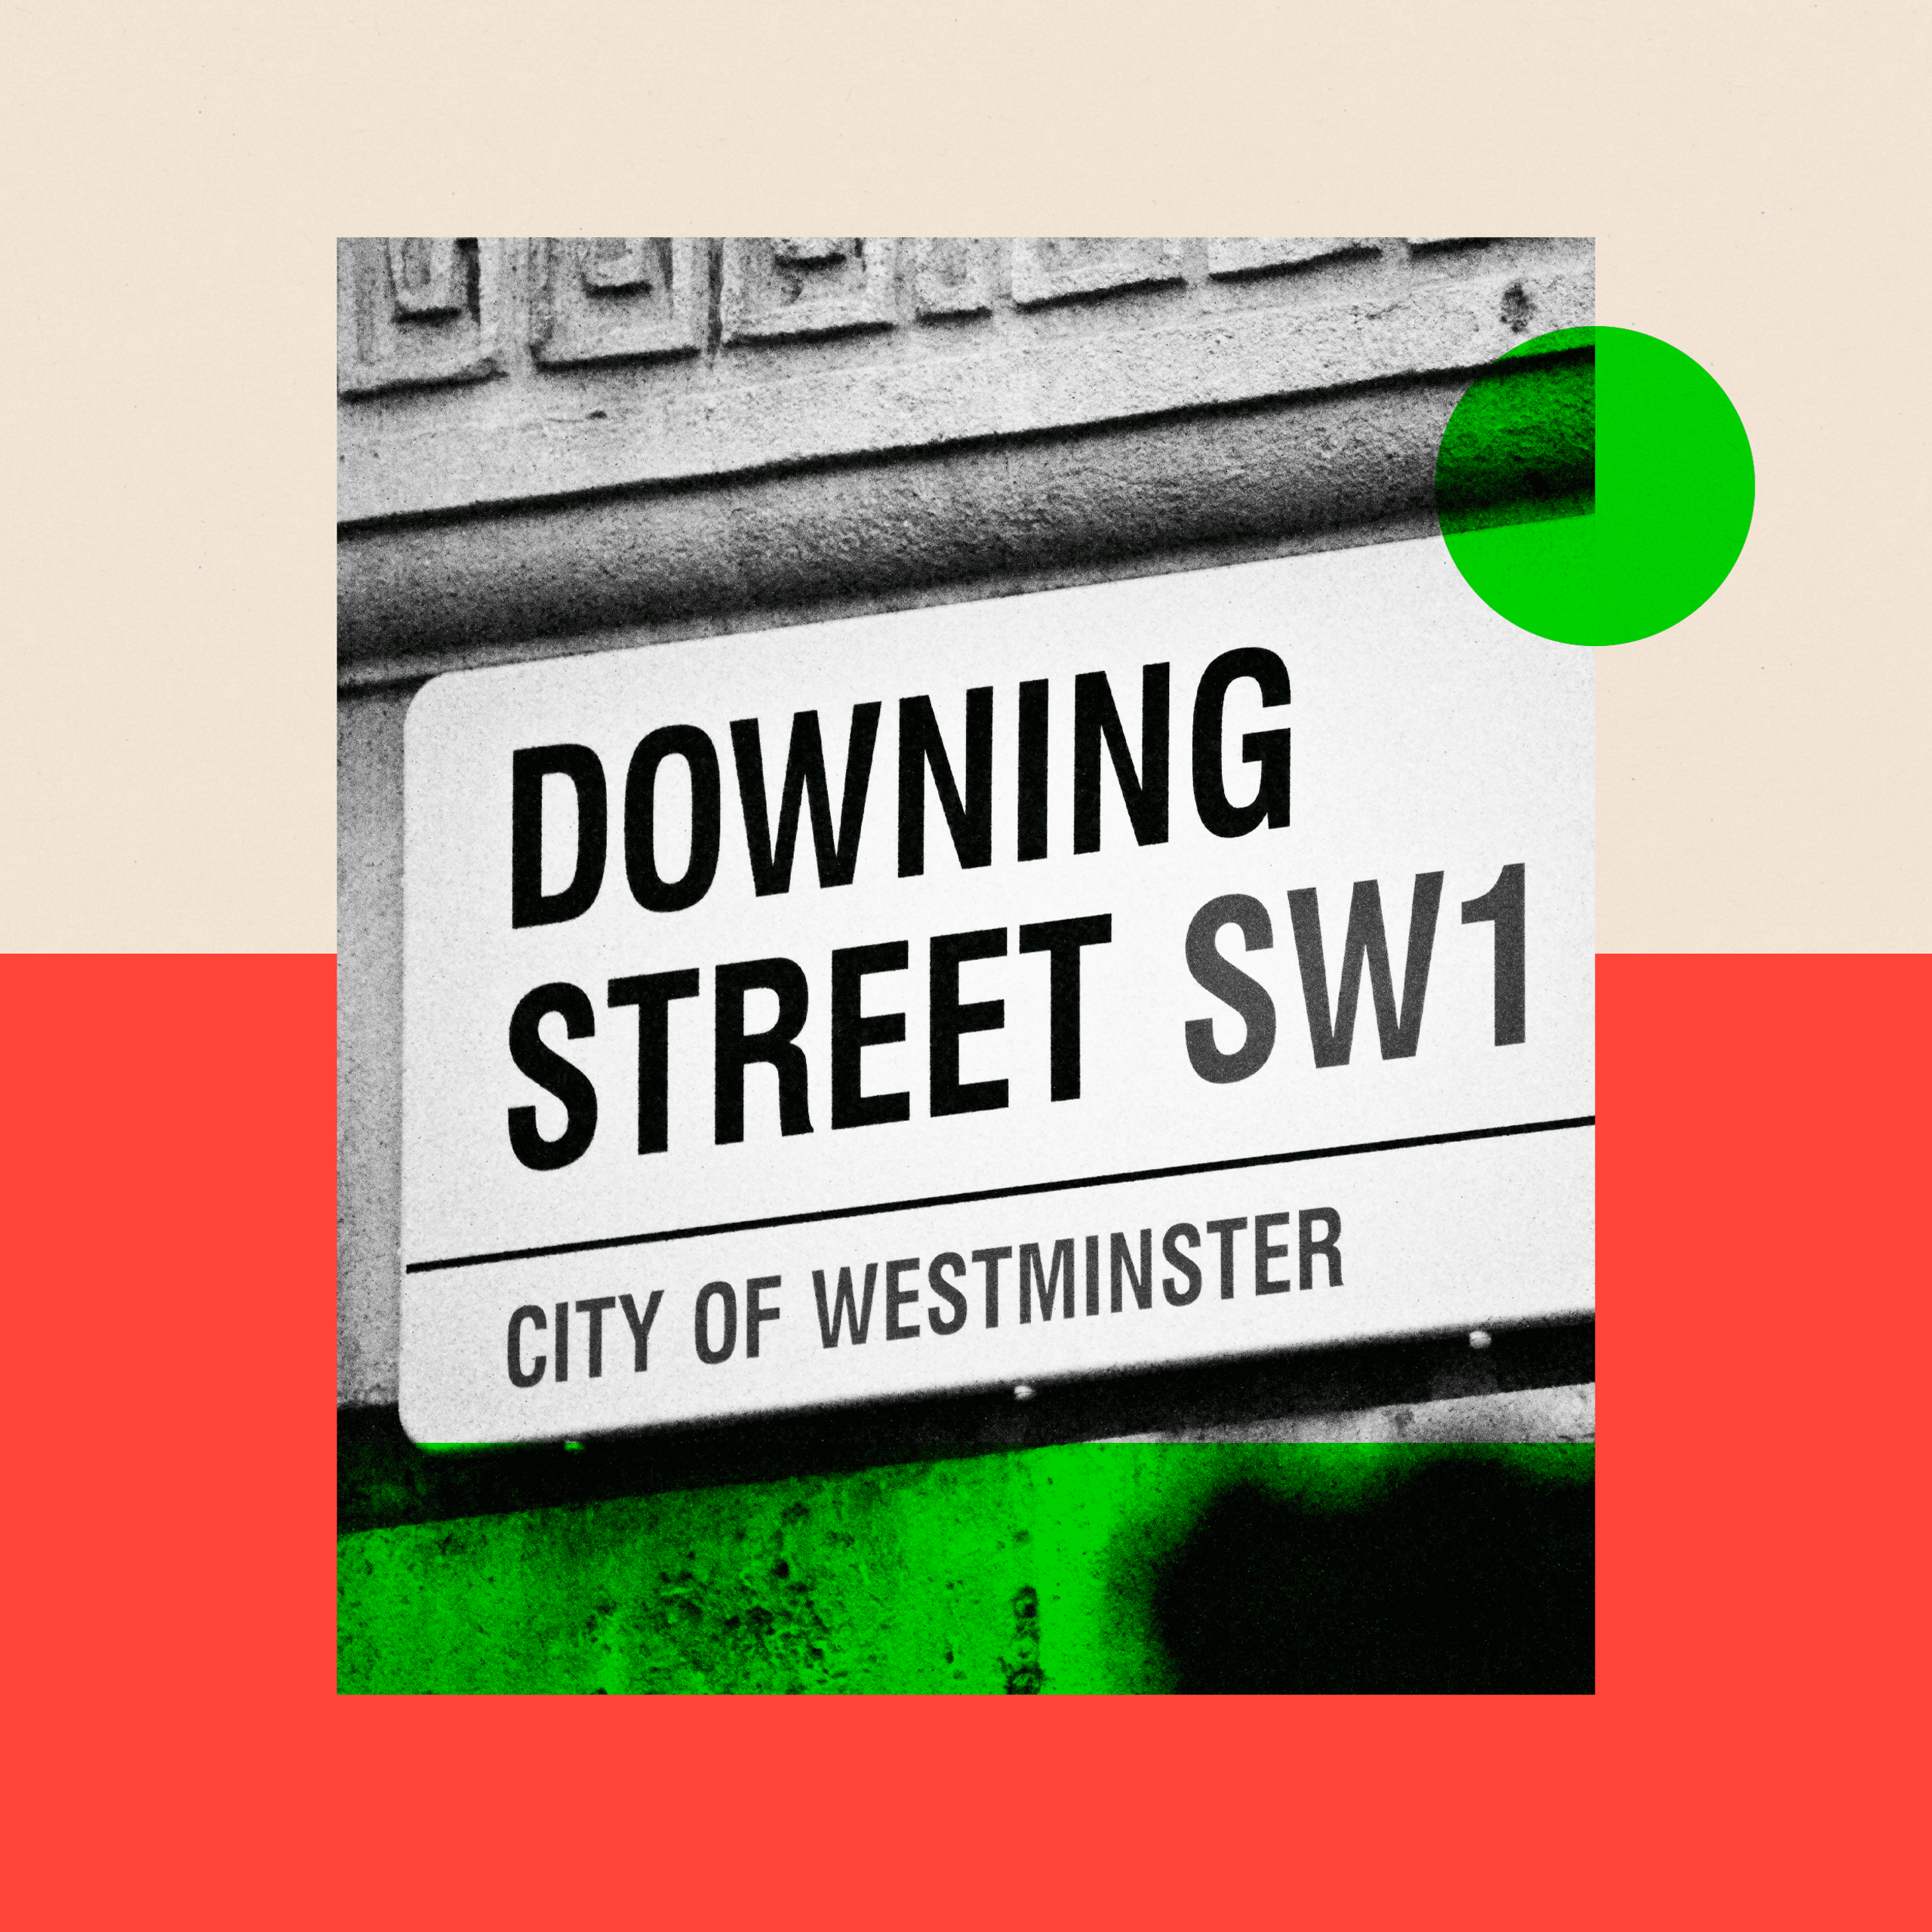 Downing Street road sign